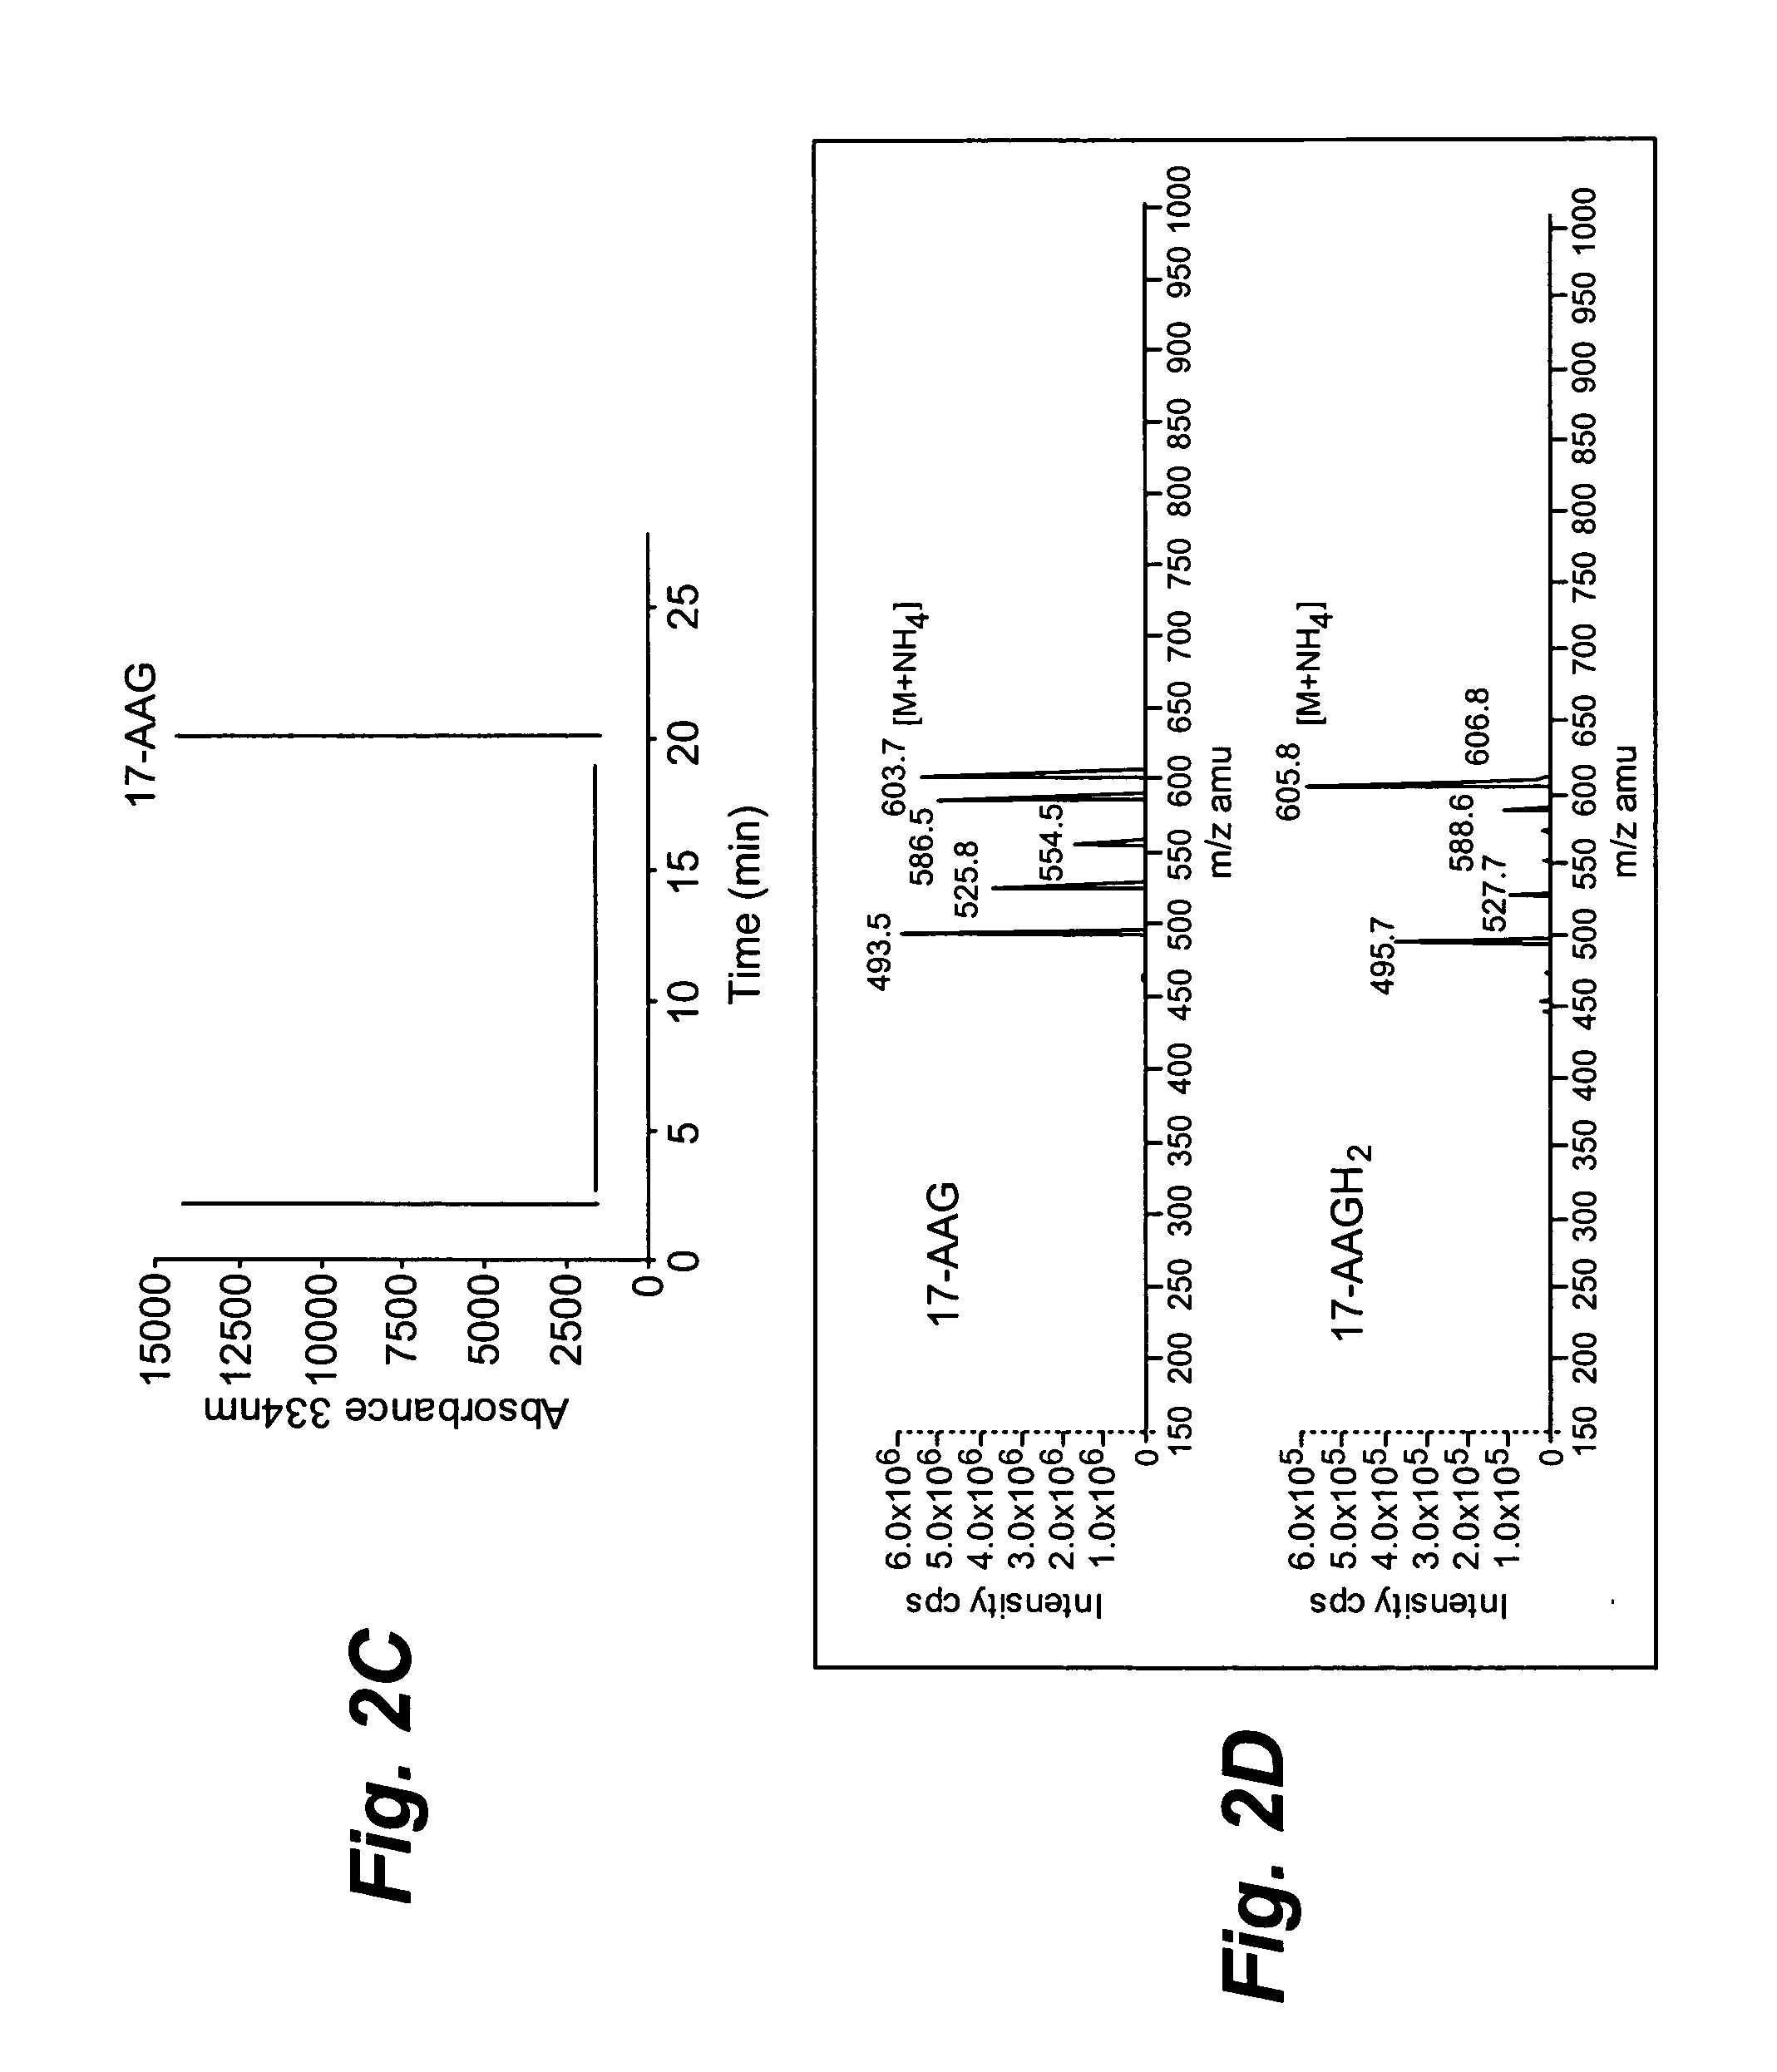 Hsp90 inhibitors, methods of making and uses therefor